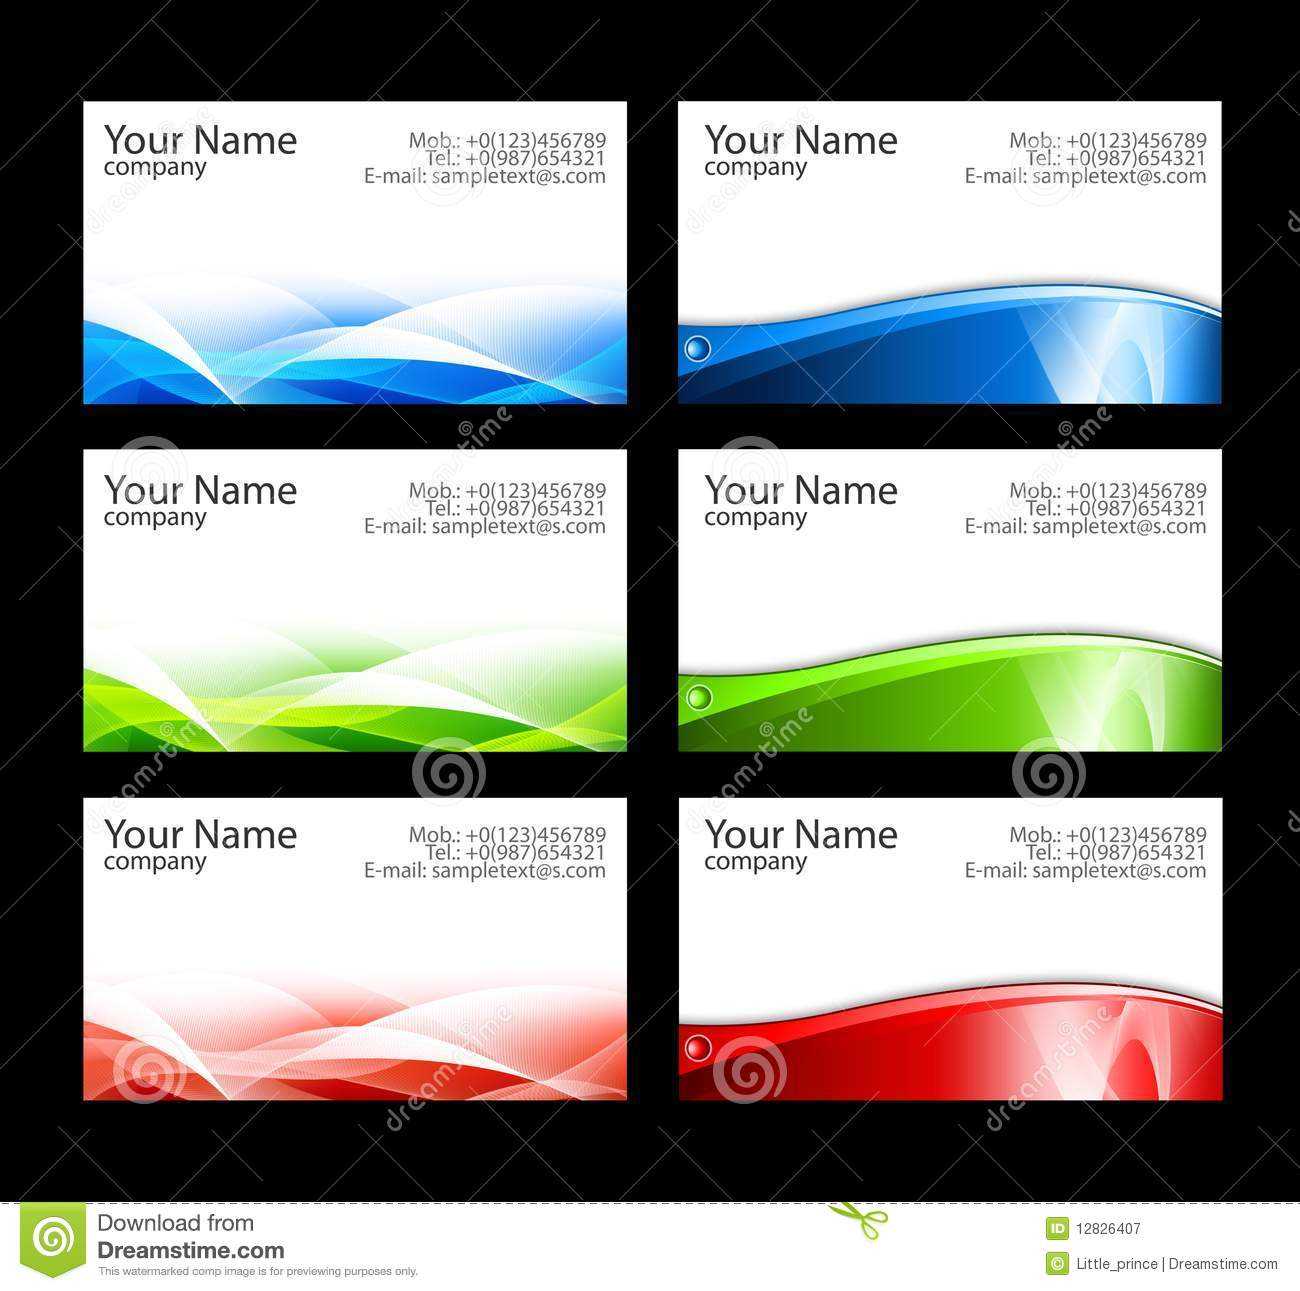 15 Free Avery Business Card Templates Images – Free Business Within Free Business Cards Templates For Word